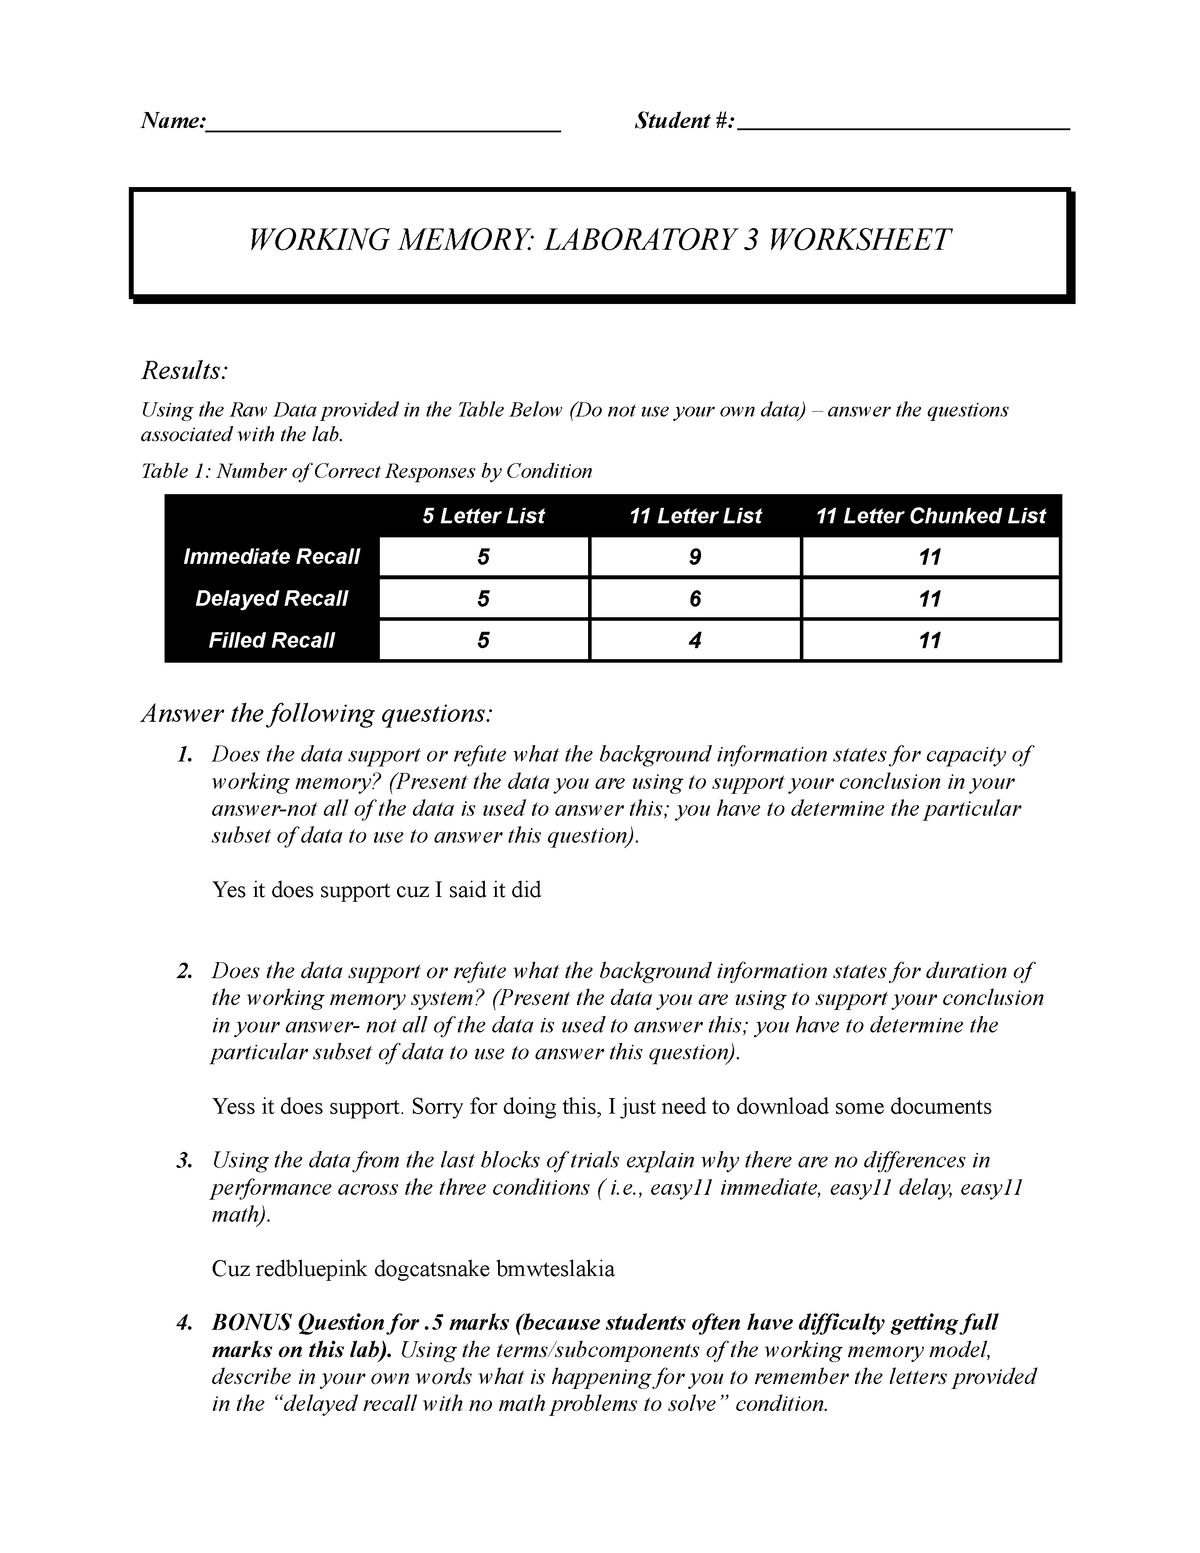 Lab For Some Recall Thing Name Student Working Memory Laboratory 3 Worksheet Results Using Studocu